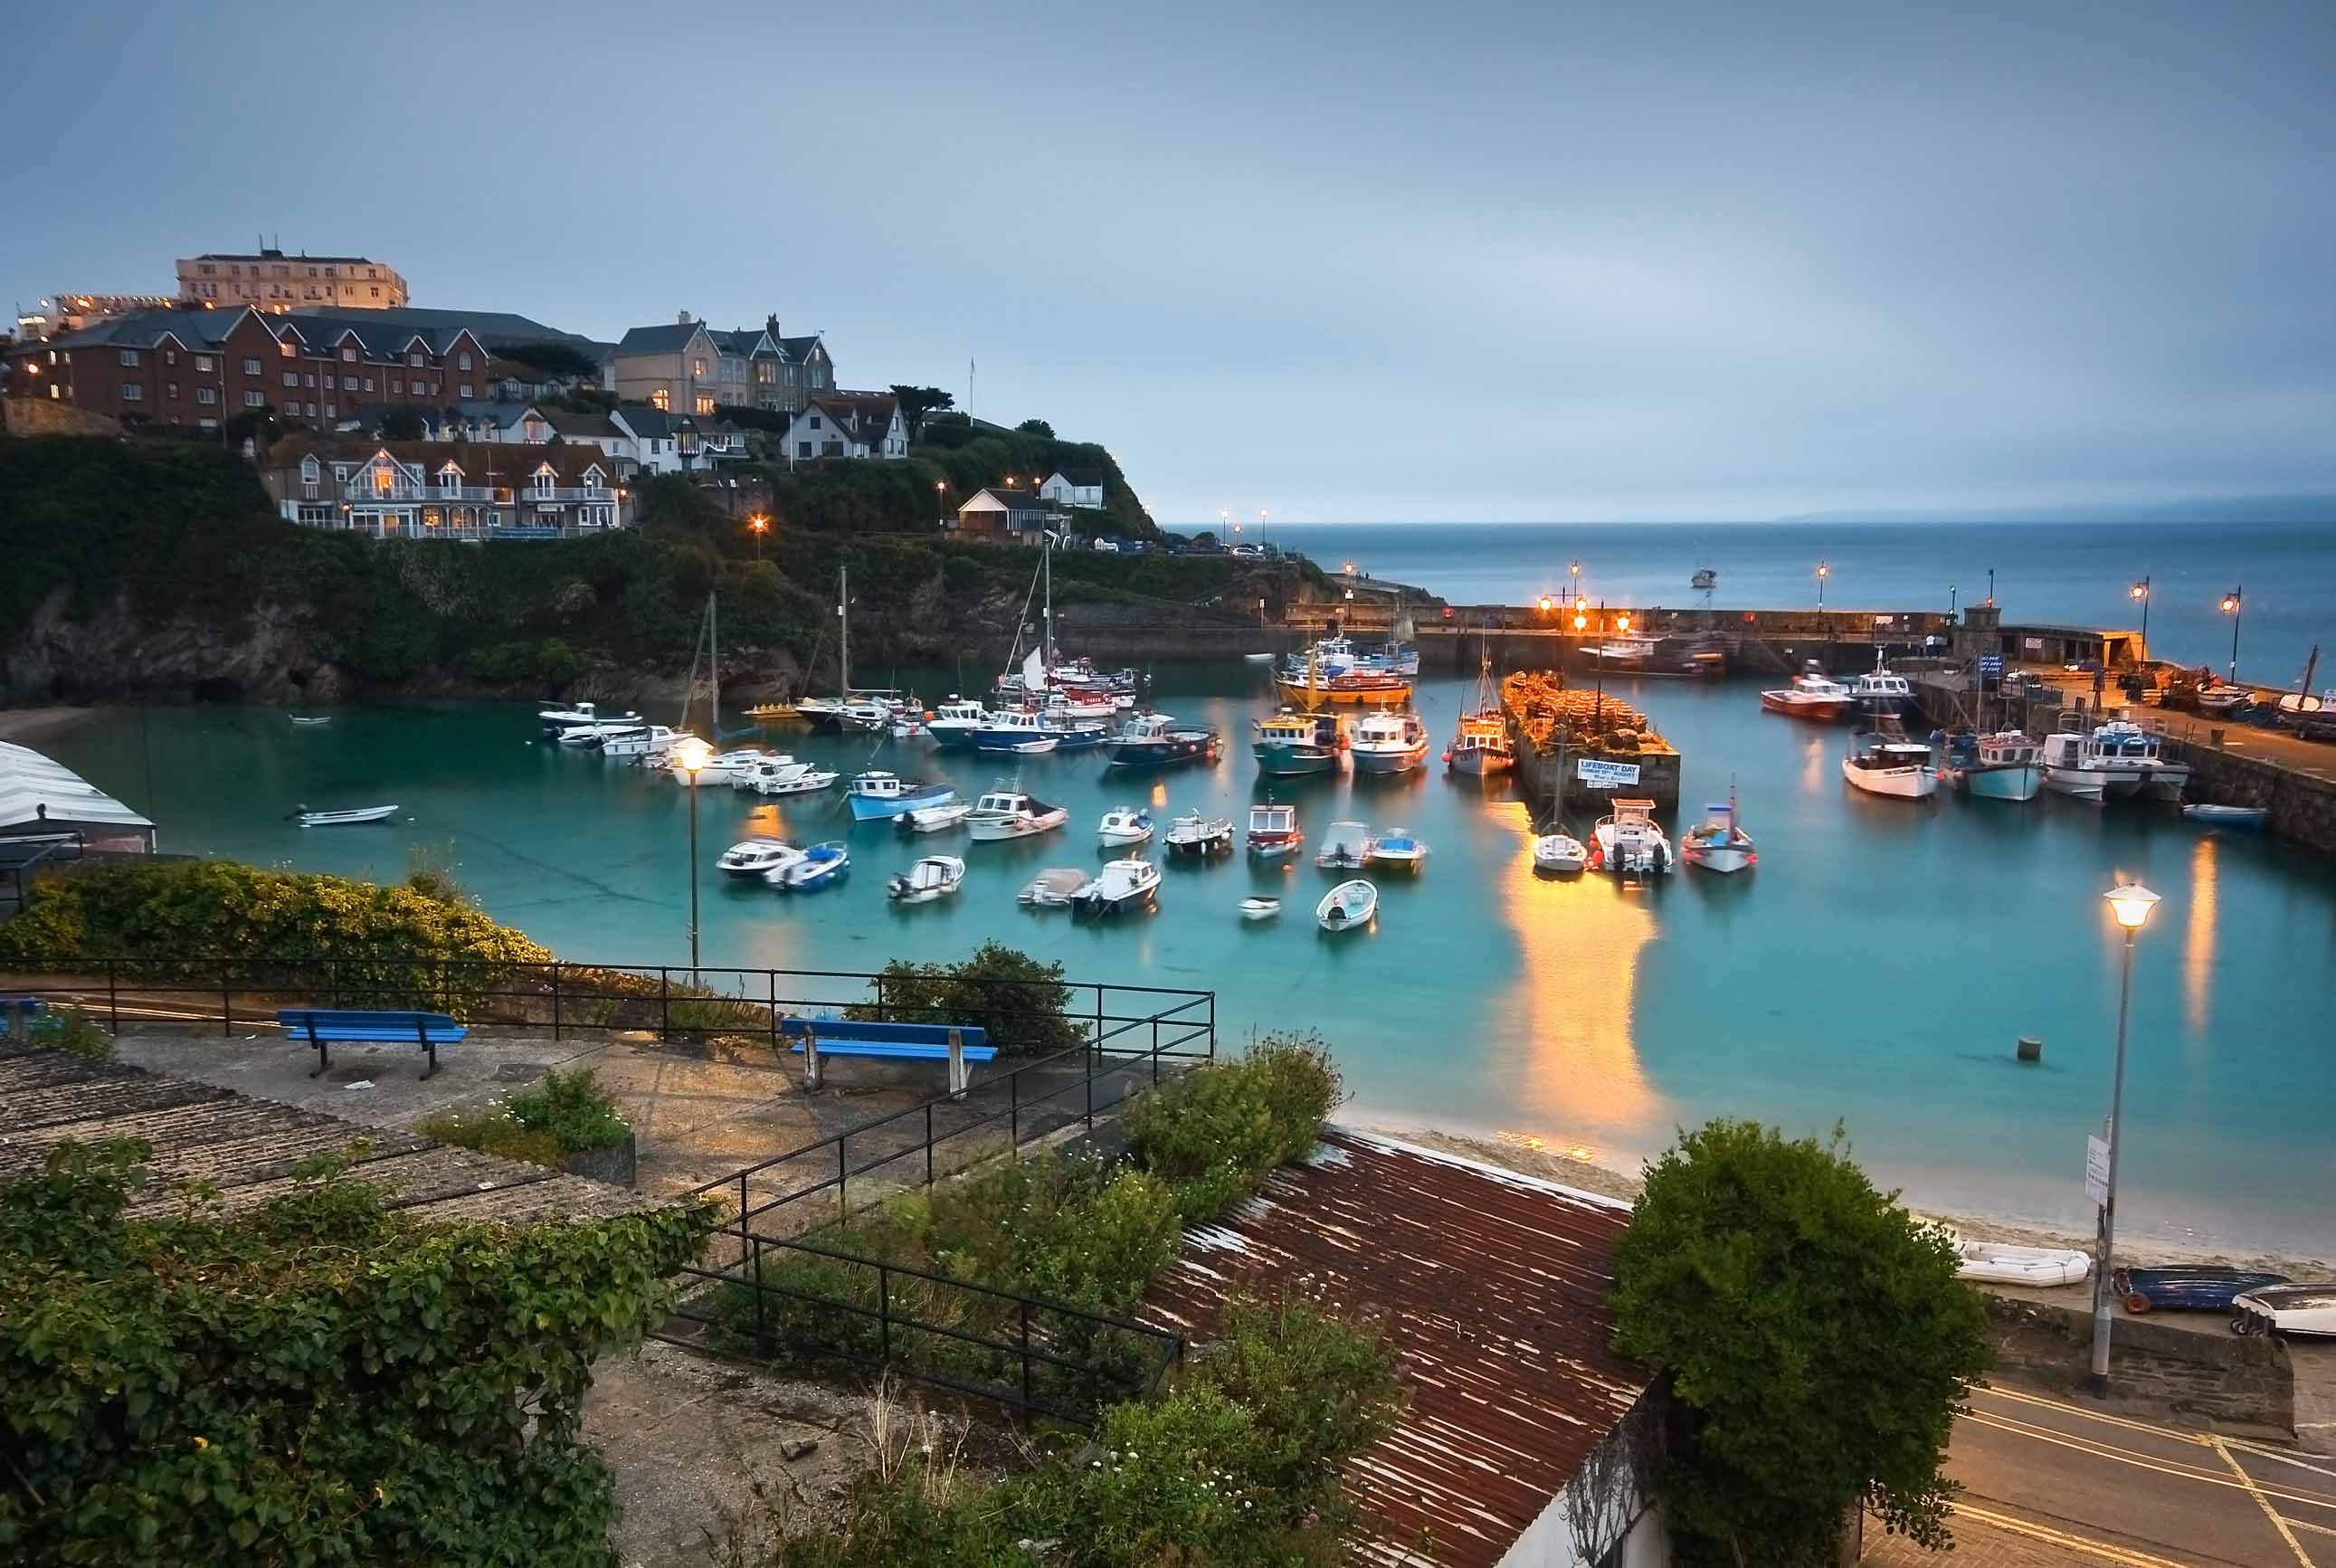 Newquay harbour at dusk with lights illuminating the boat-peppered water